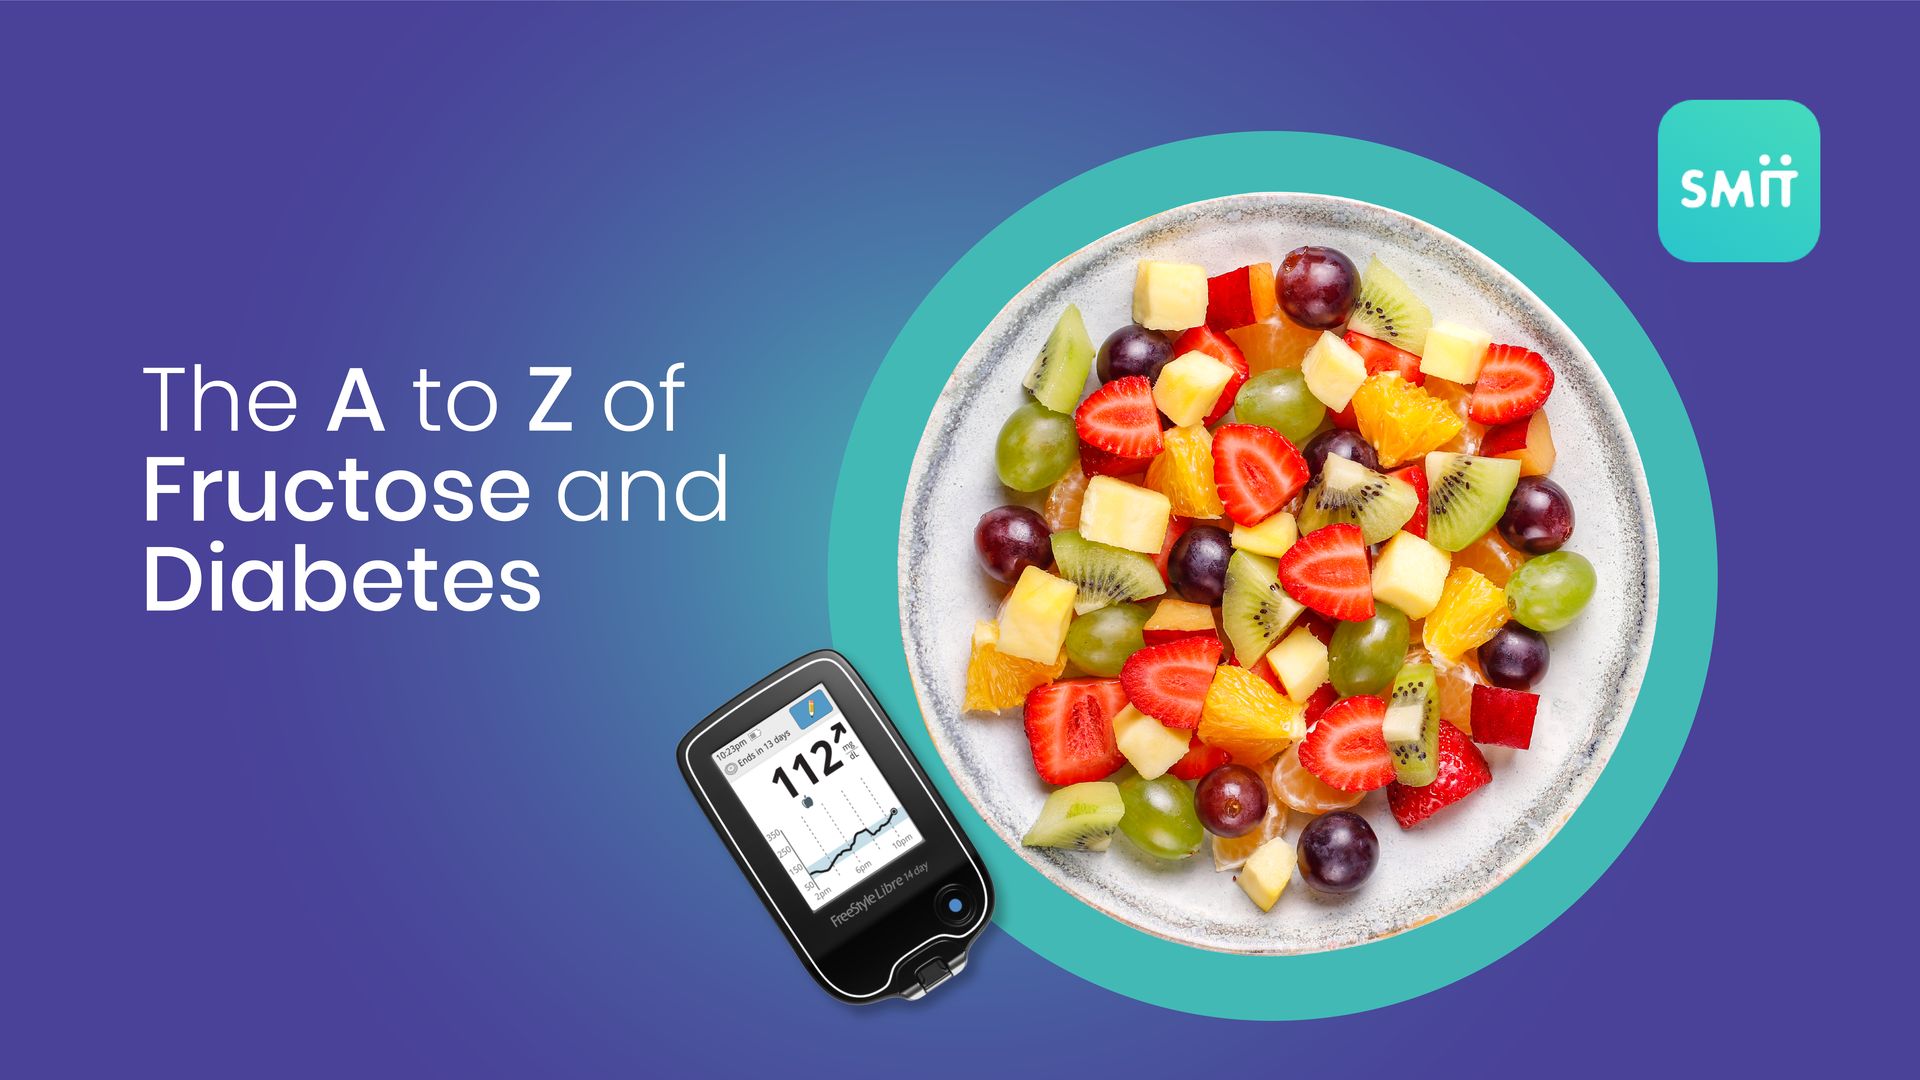 The A to Z of Fructose and Diabetes